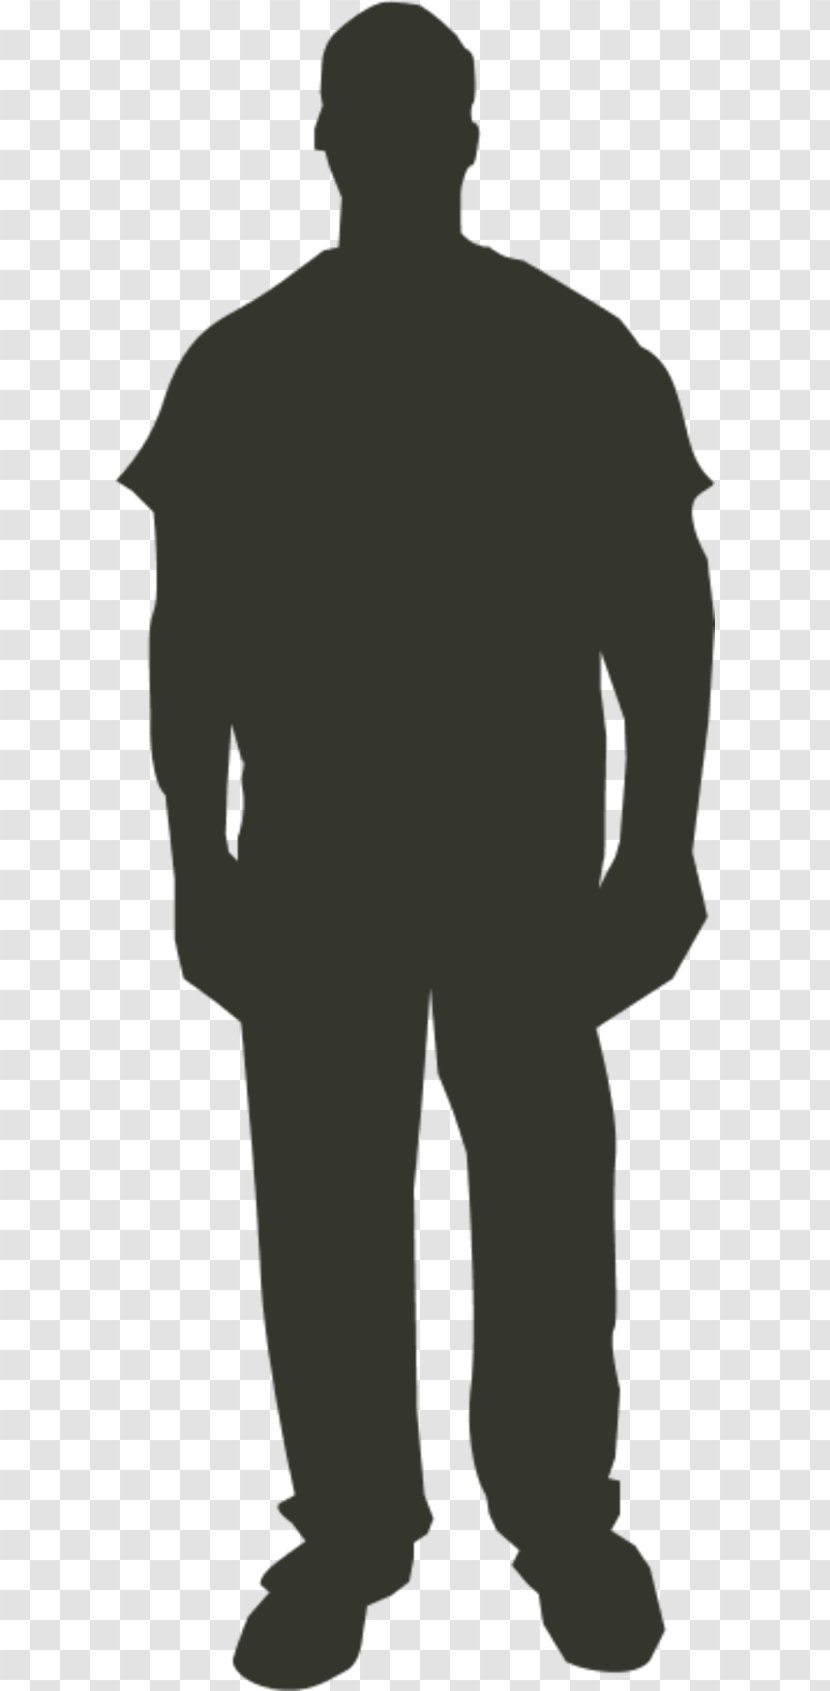 Person Outline Clip Art - Male - Man Standing Silhouette Transparent PNG